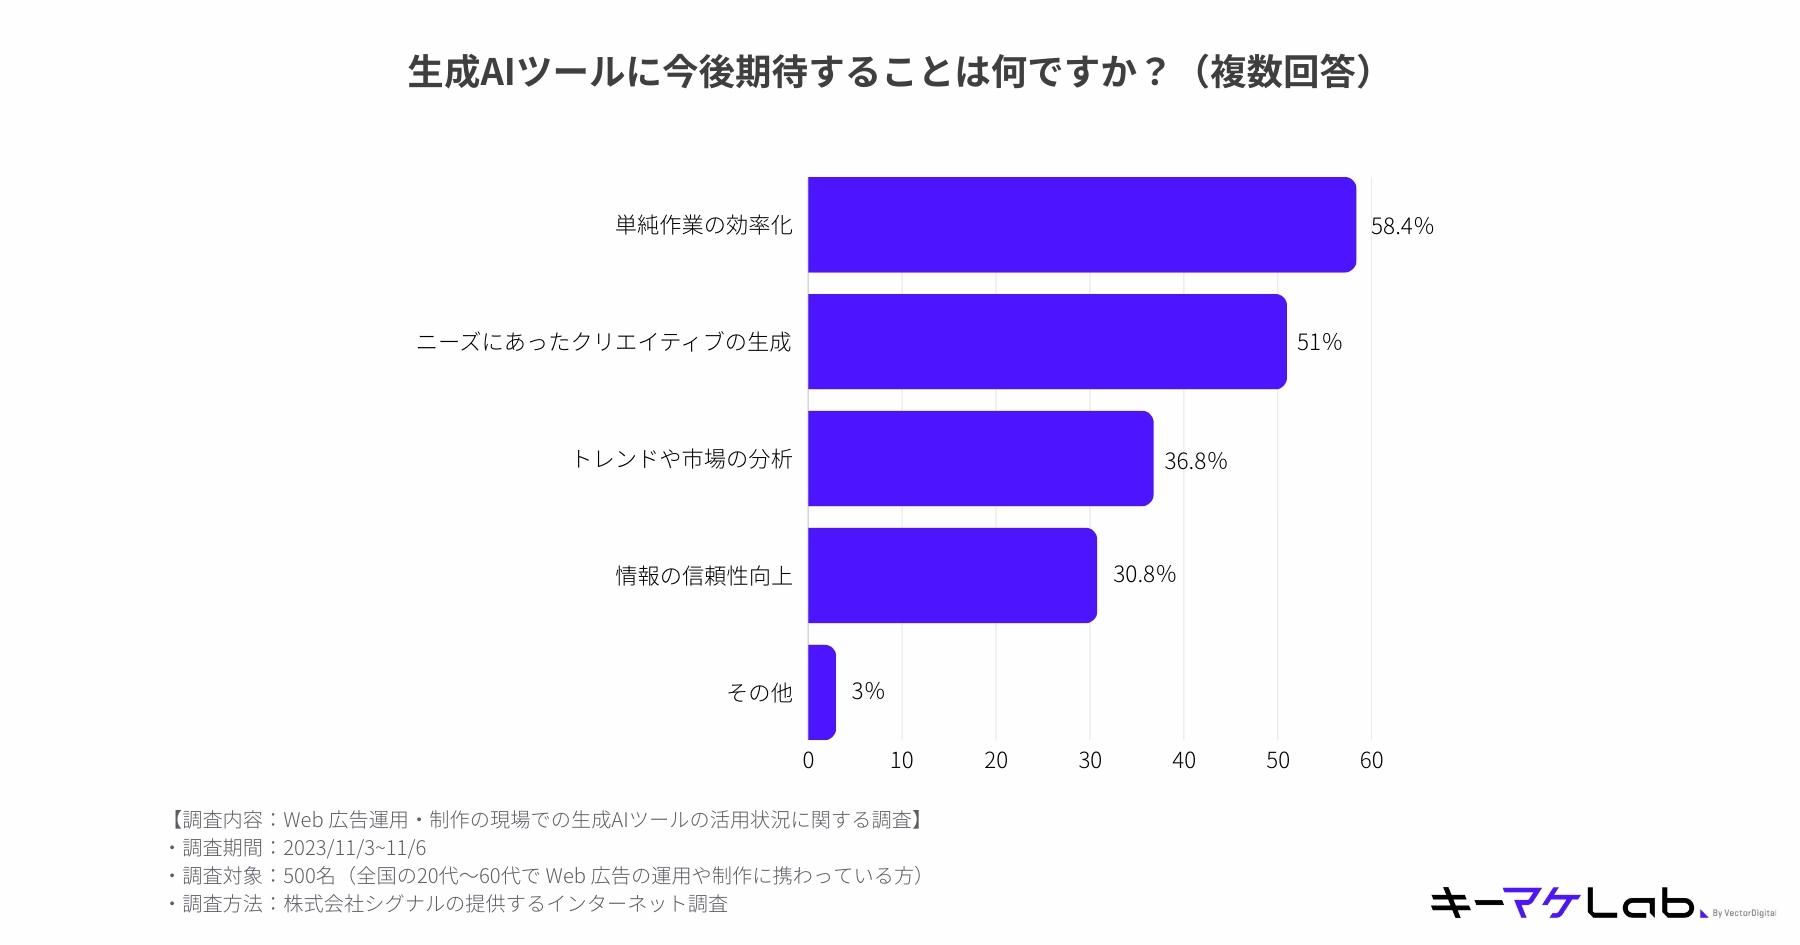 When asked, "What do you expect from generative AI tools in the future?", "Improving the efficiency of simple tasks" was the most popular answer at 58.4%. The runner-up was "Generating creative that meets needs" at 51%, followed by "Analyzing trends and markets" at 36.8%.